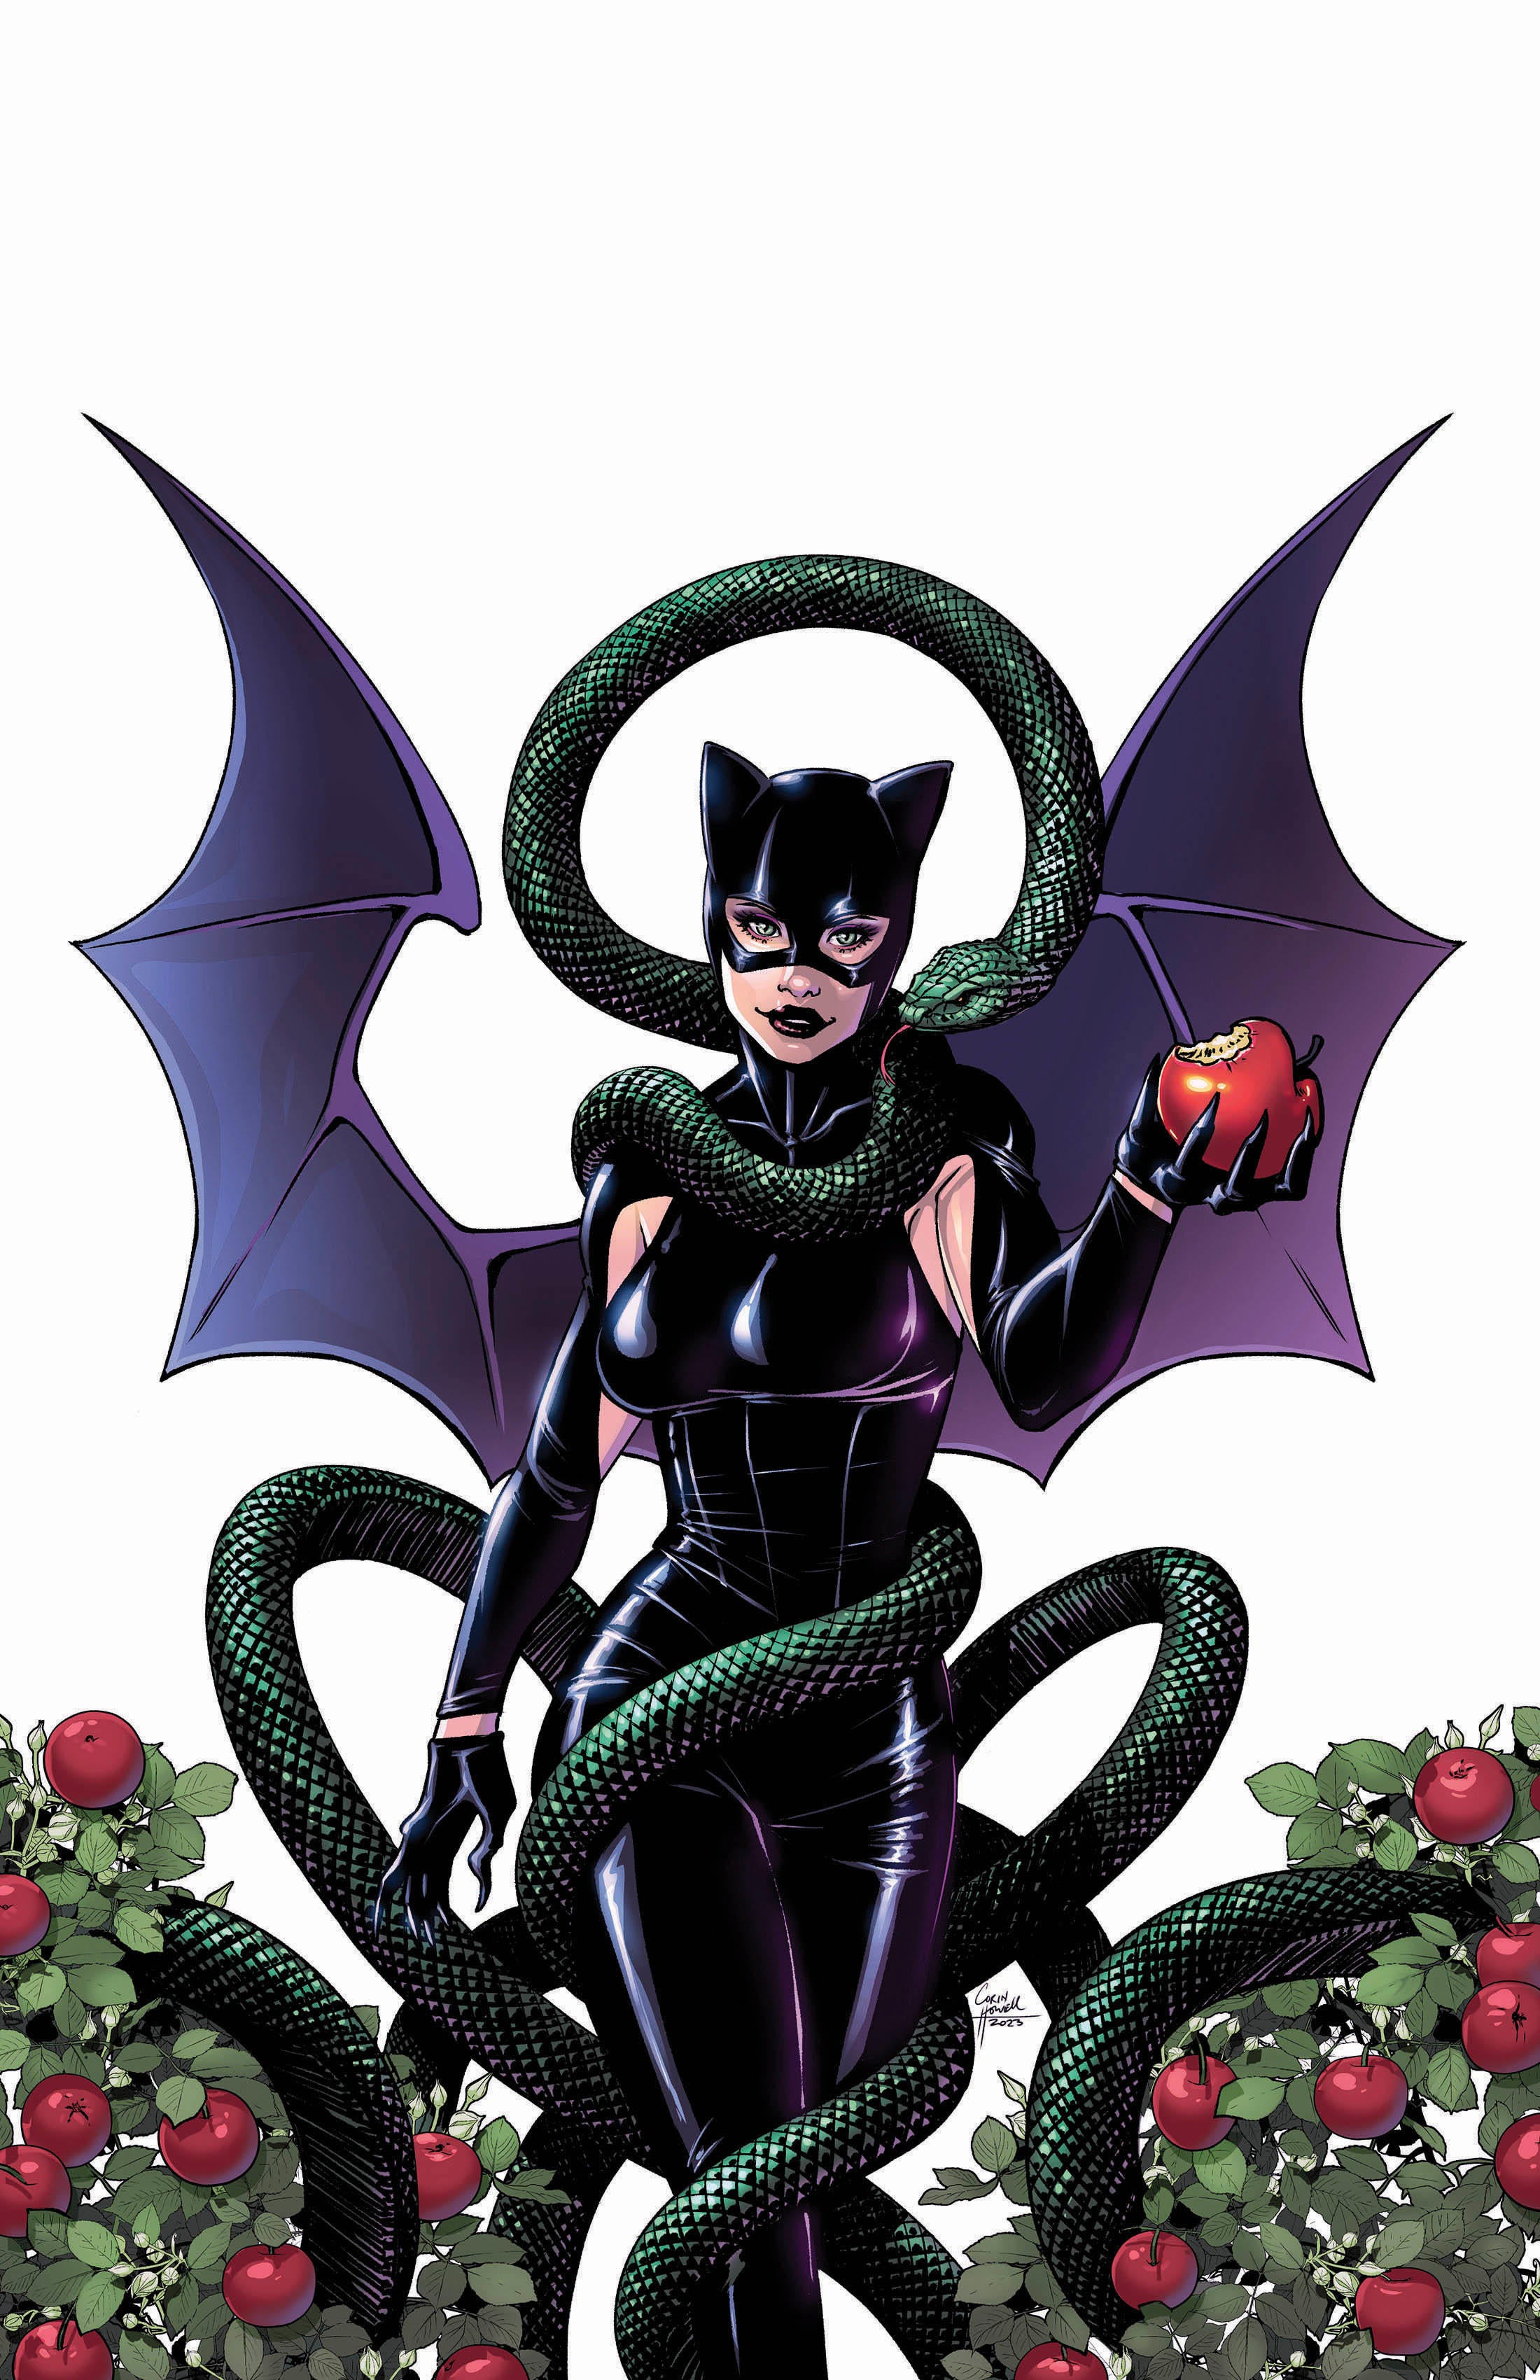 knight-terrors-catwoman-1-open-to-order-variant-howell.jpg